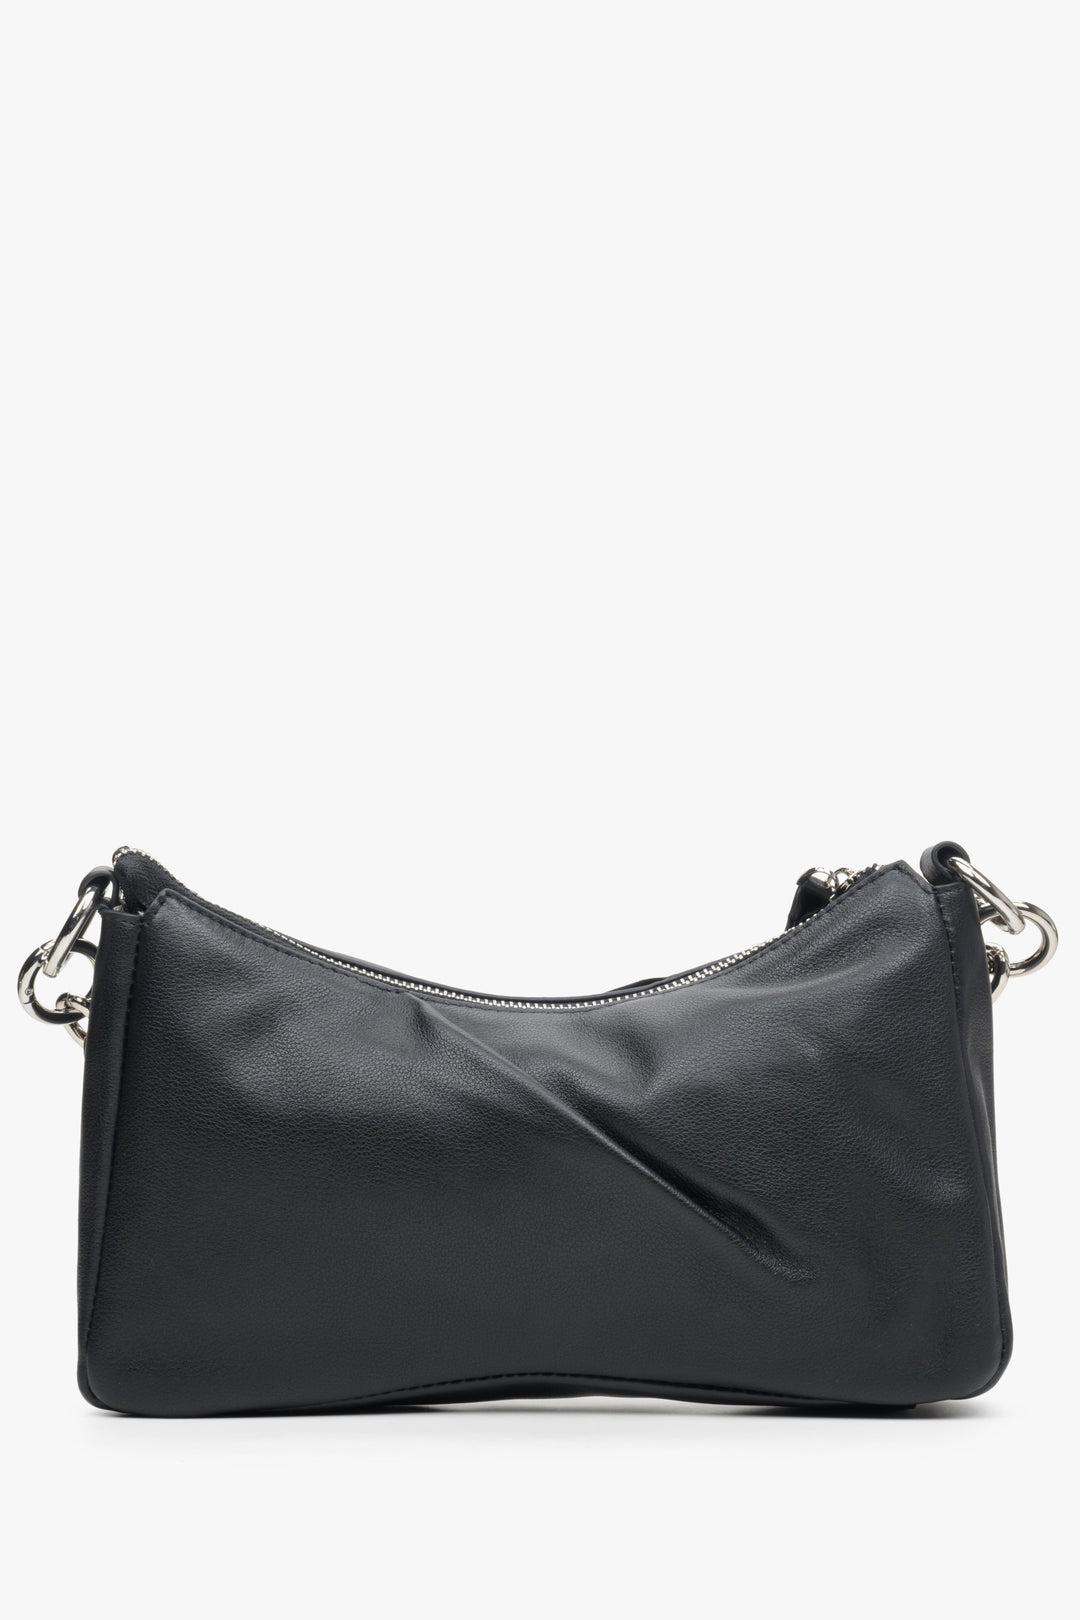 Estro's women's black leather bag with a chain strap - reverse side.